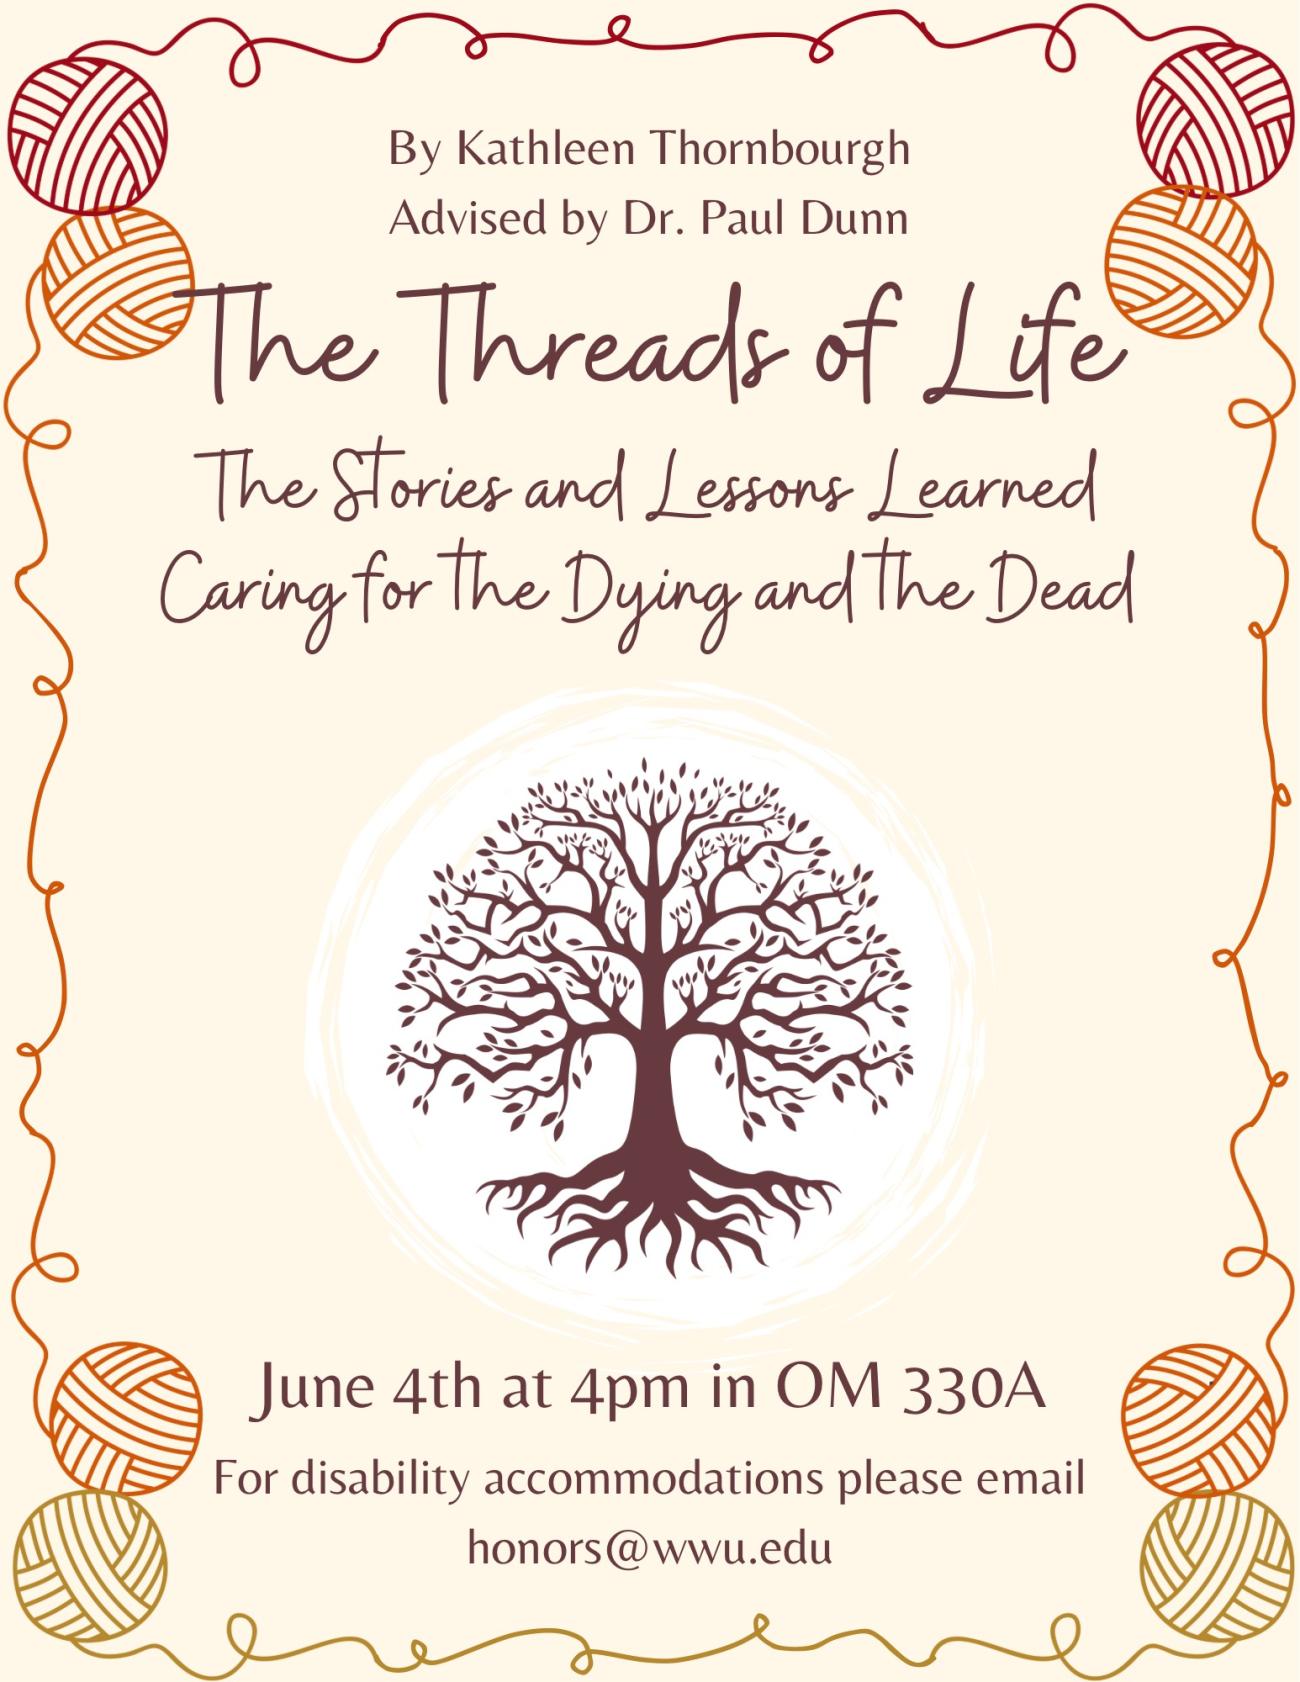 A cream background with red, orange, and yellow balls of yarn framing the border and a branching tree in the middle. The text reads “By Kathleen Thornbourgh, Advised by Dr. Paul Dunn” “The Threads of Life the Stories and Lessons Learned Caring for the Dying and the Dead” “June 4th at 4 pm in OM 330A for disability accommodations please email honors@wwu.edu”